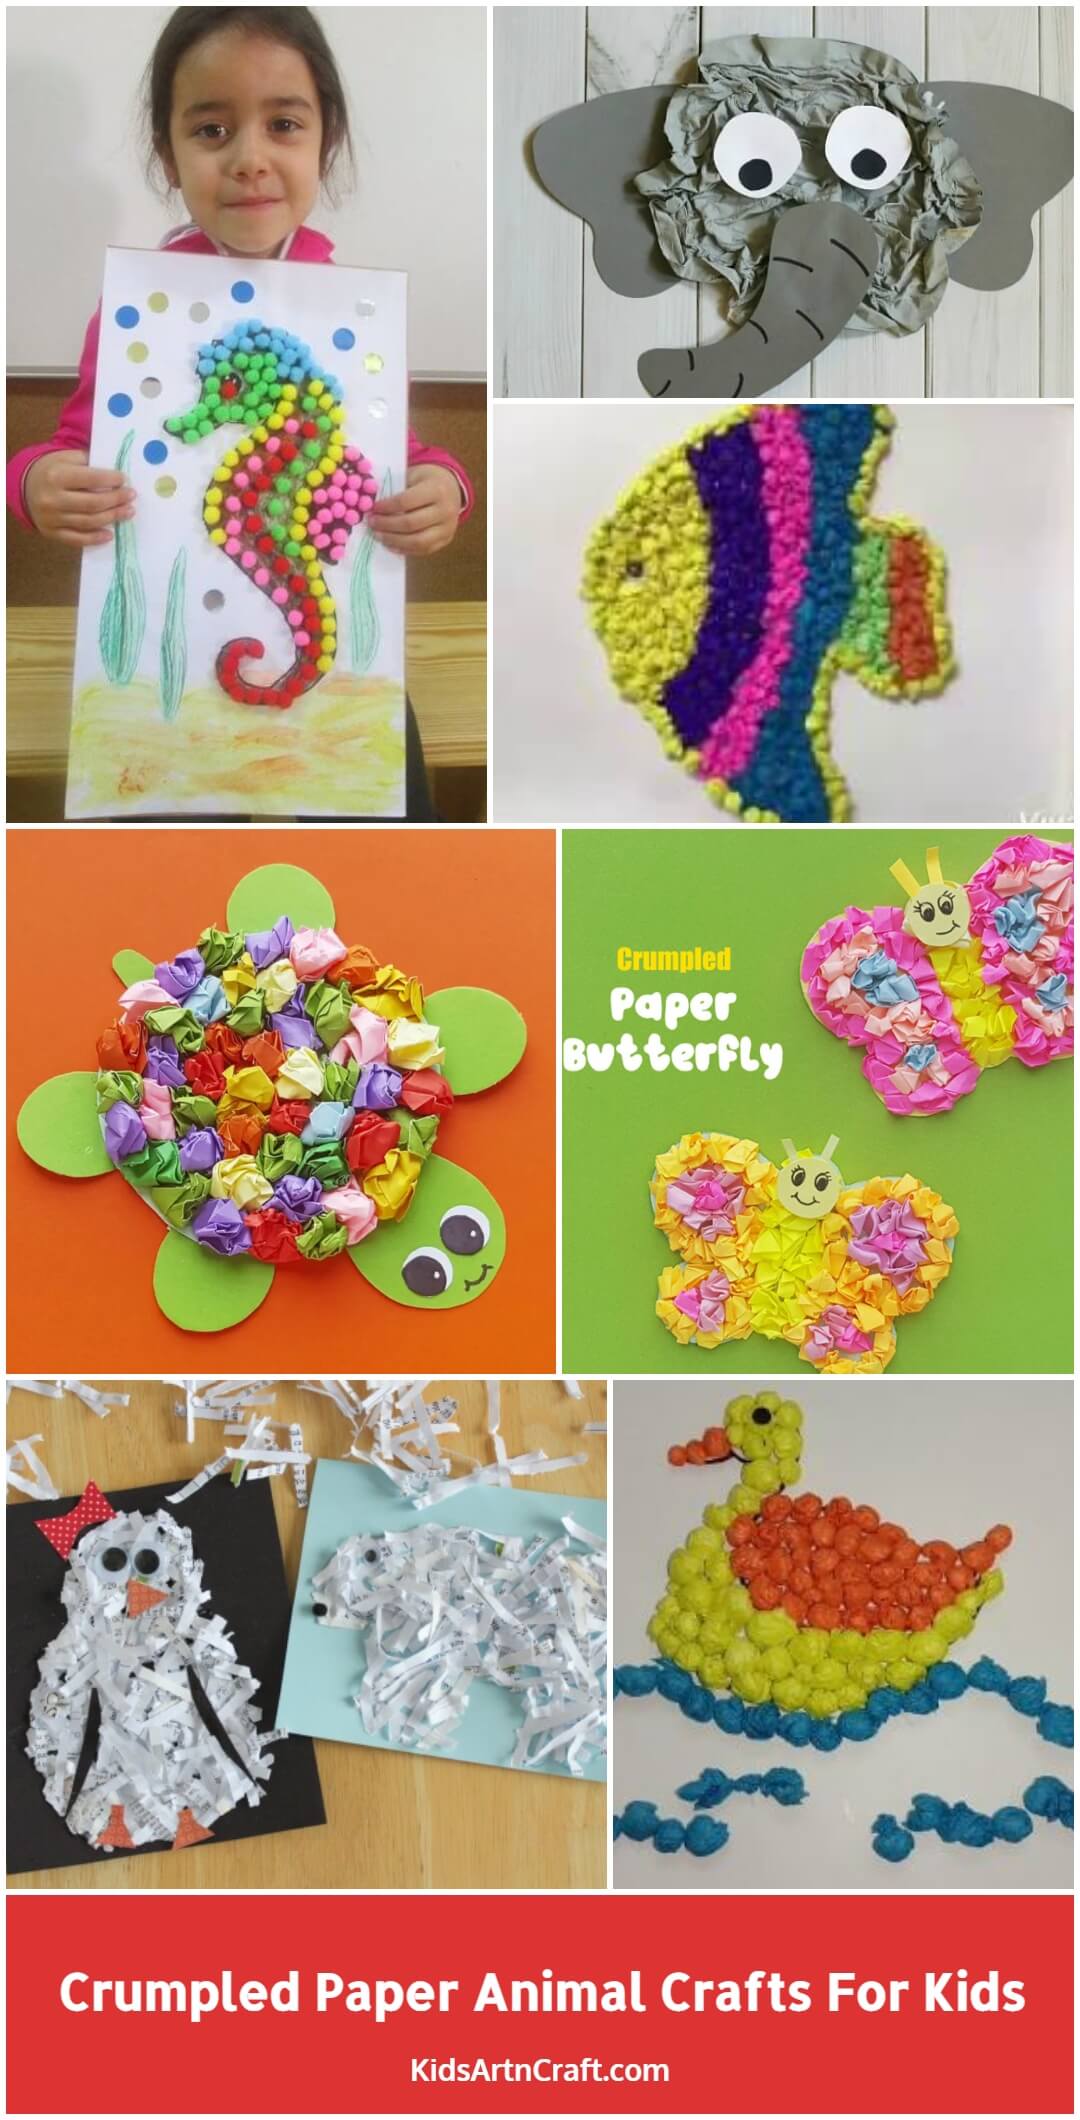 Crumpled Paper Animal Crafts for Kids